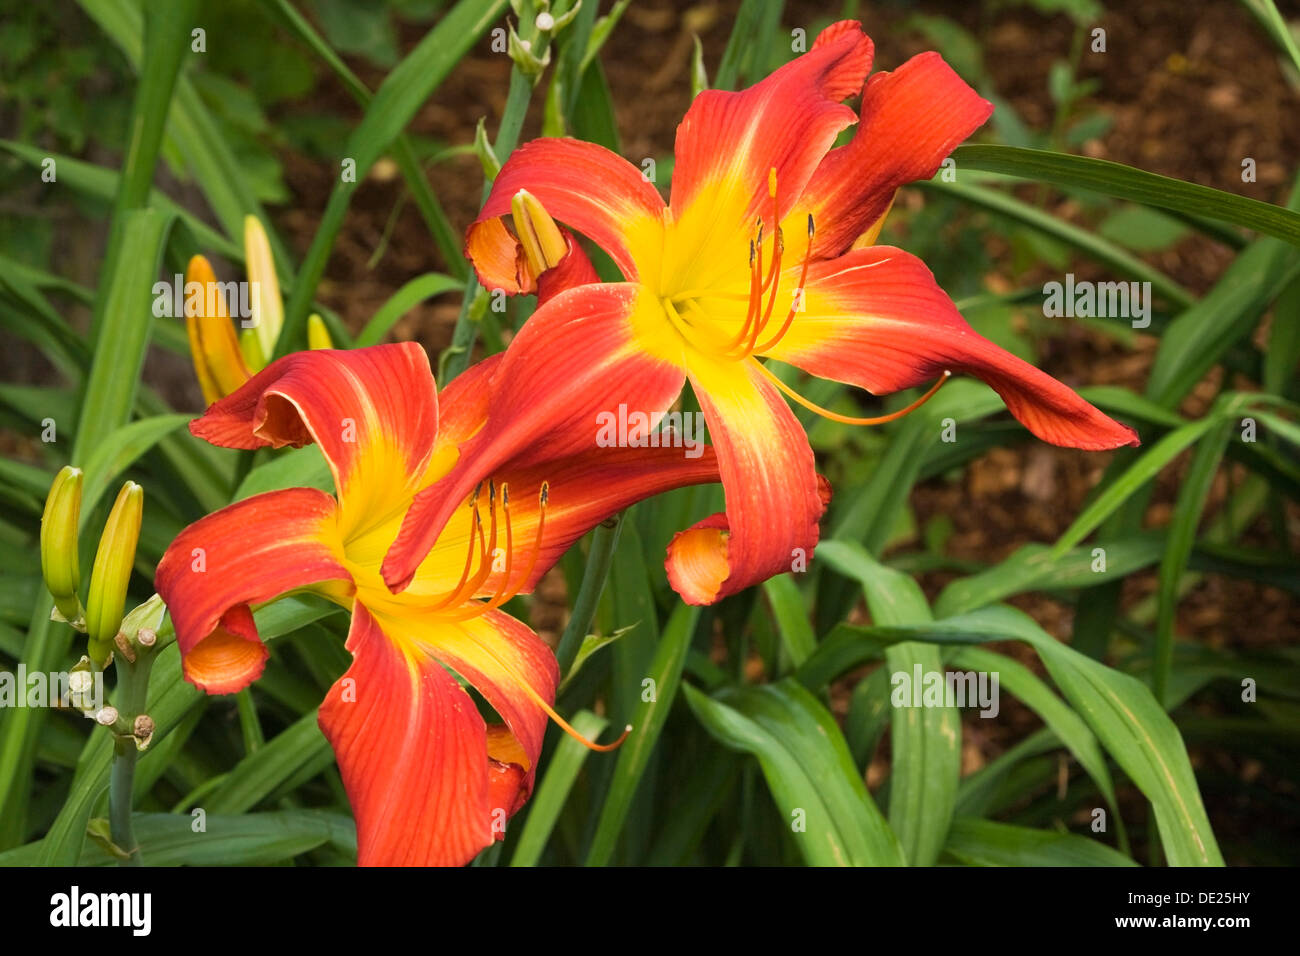 Red and yellow daylilies (Hemerocallis), flowers, Quebec Province, Canada Stock Photo